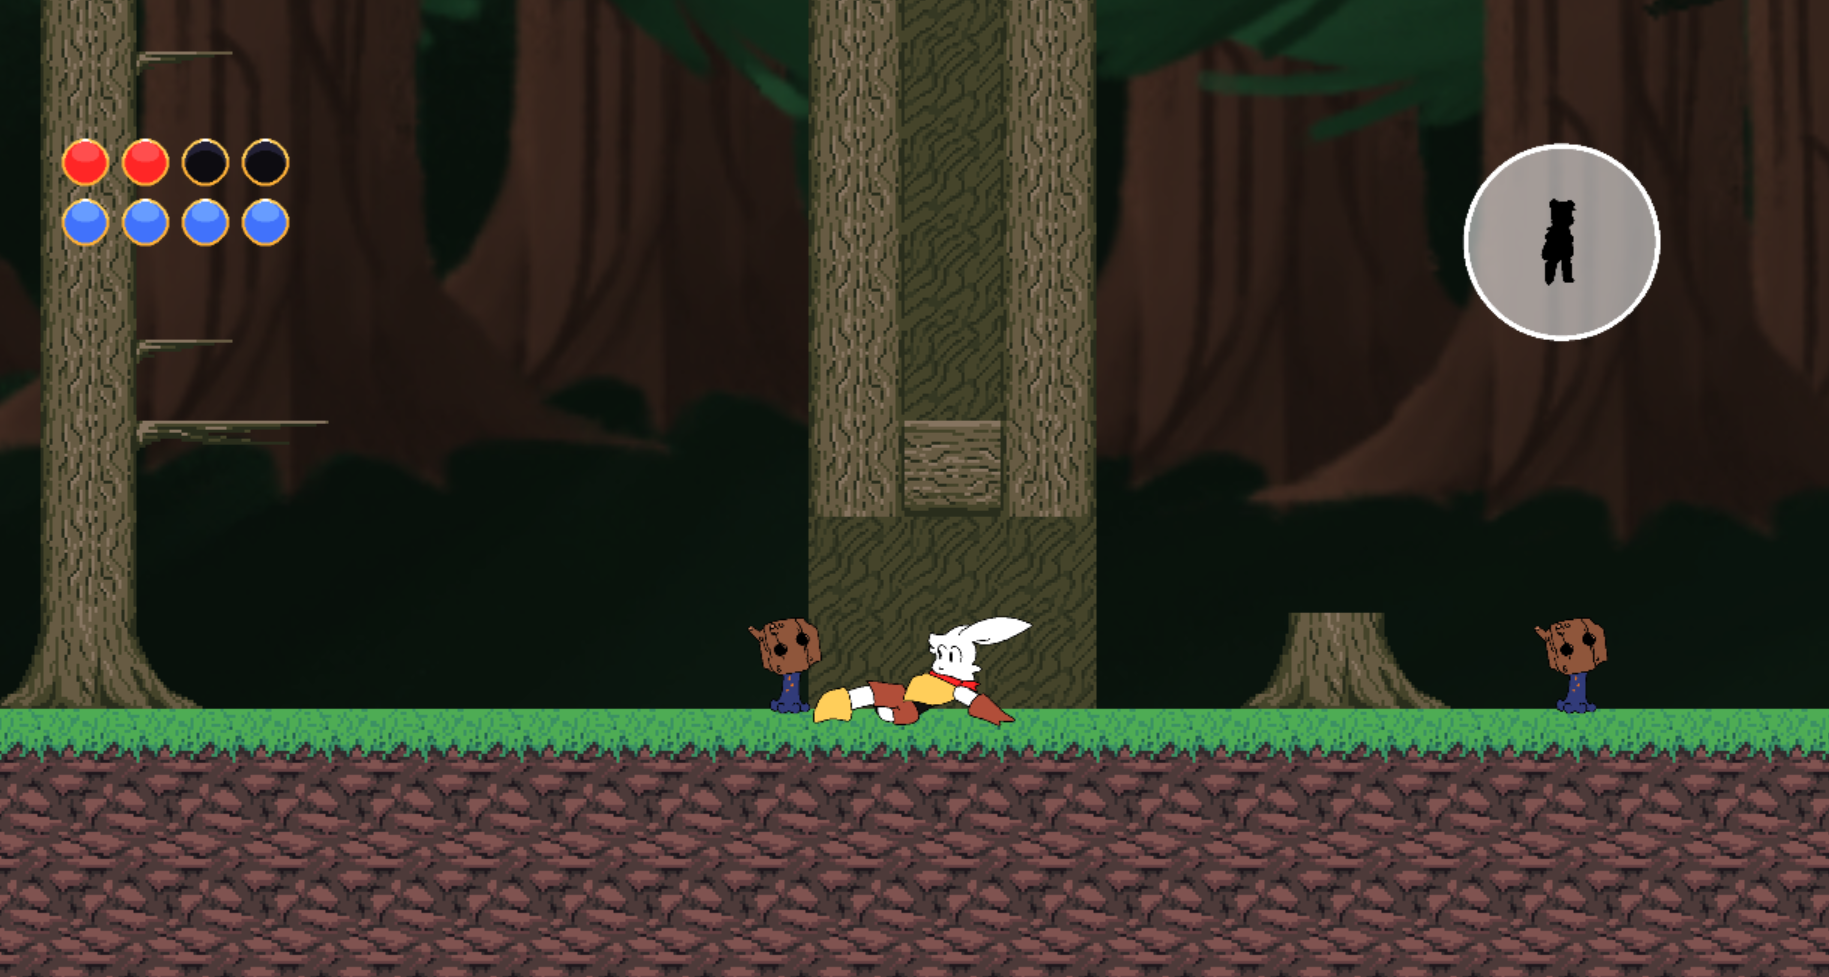 A screenshot of Bip + Bop where Bip the Rabbit is sliding into an enemy.